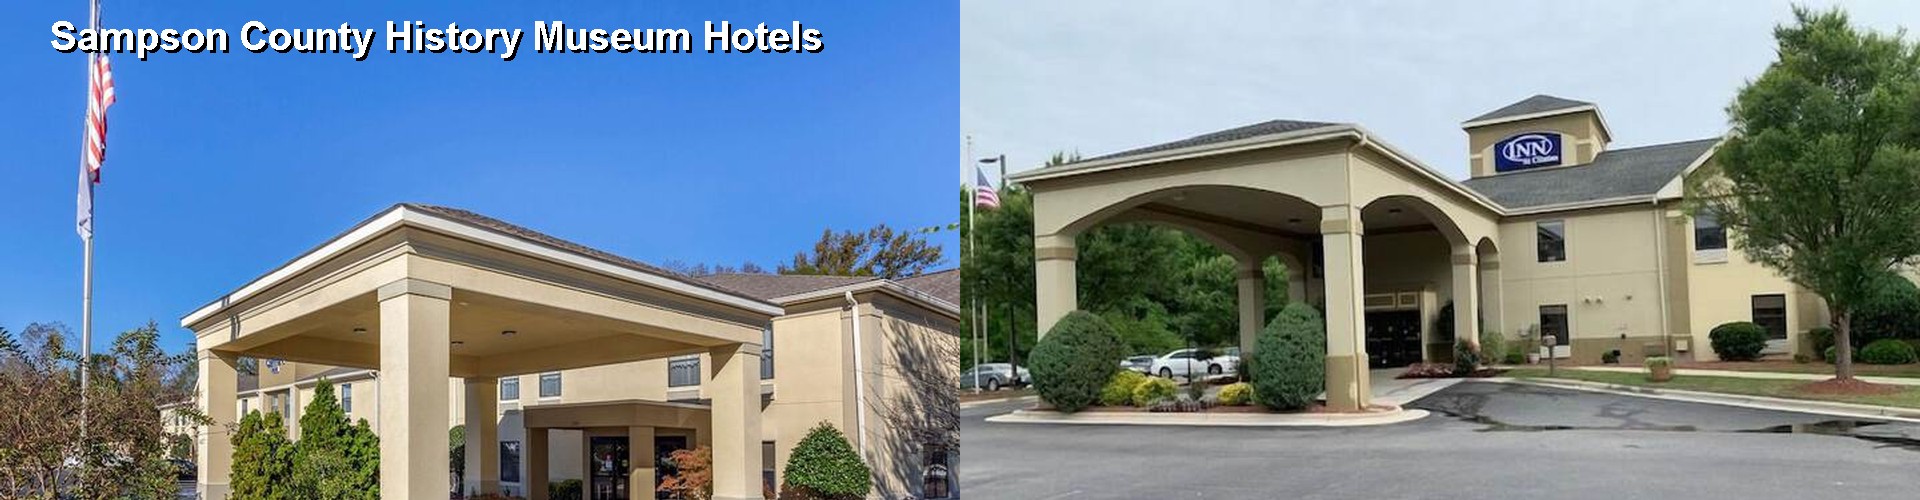 4 Best Hotels near Sampson County History Museum